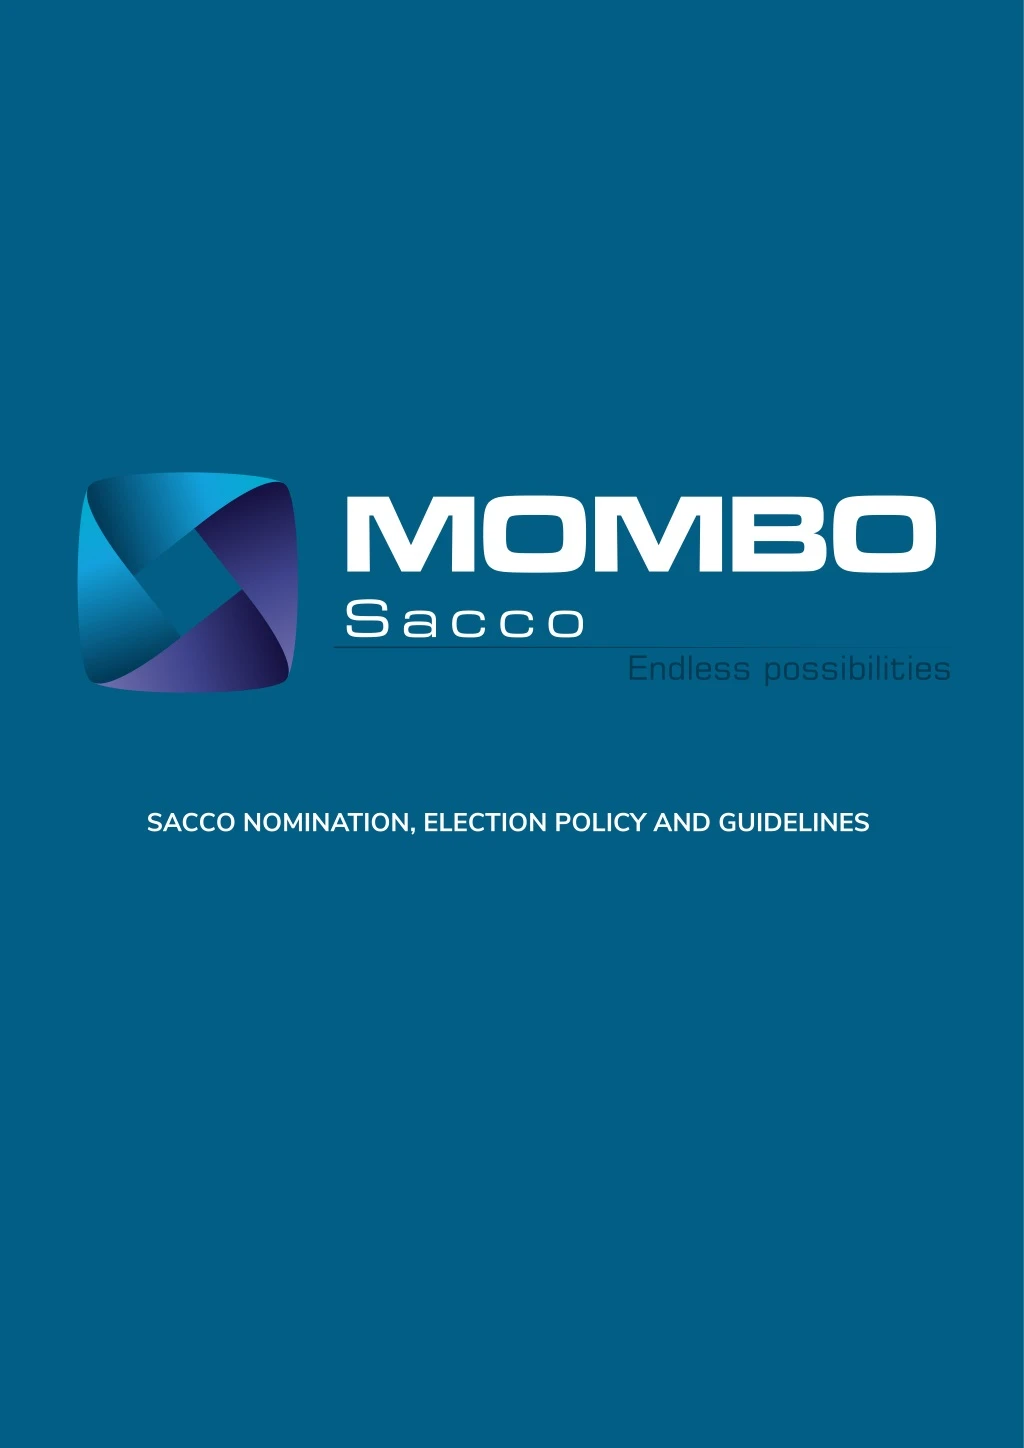 sacco nomination election policy and guidelines